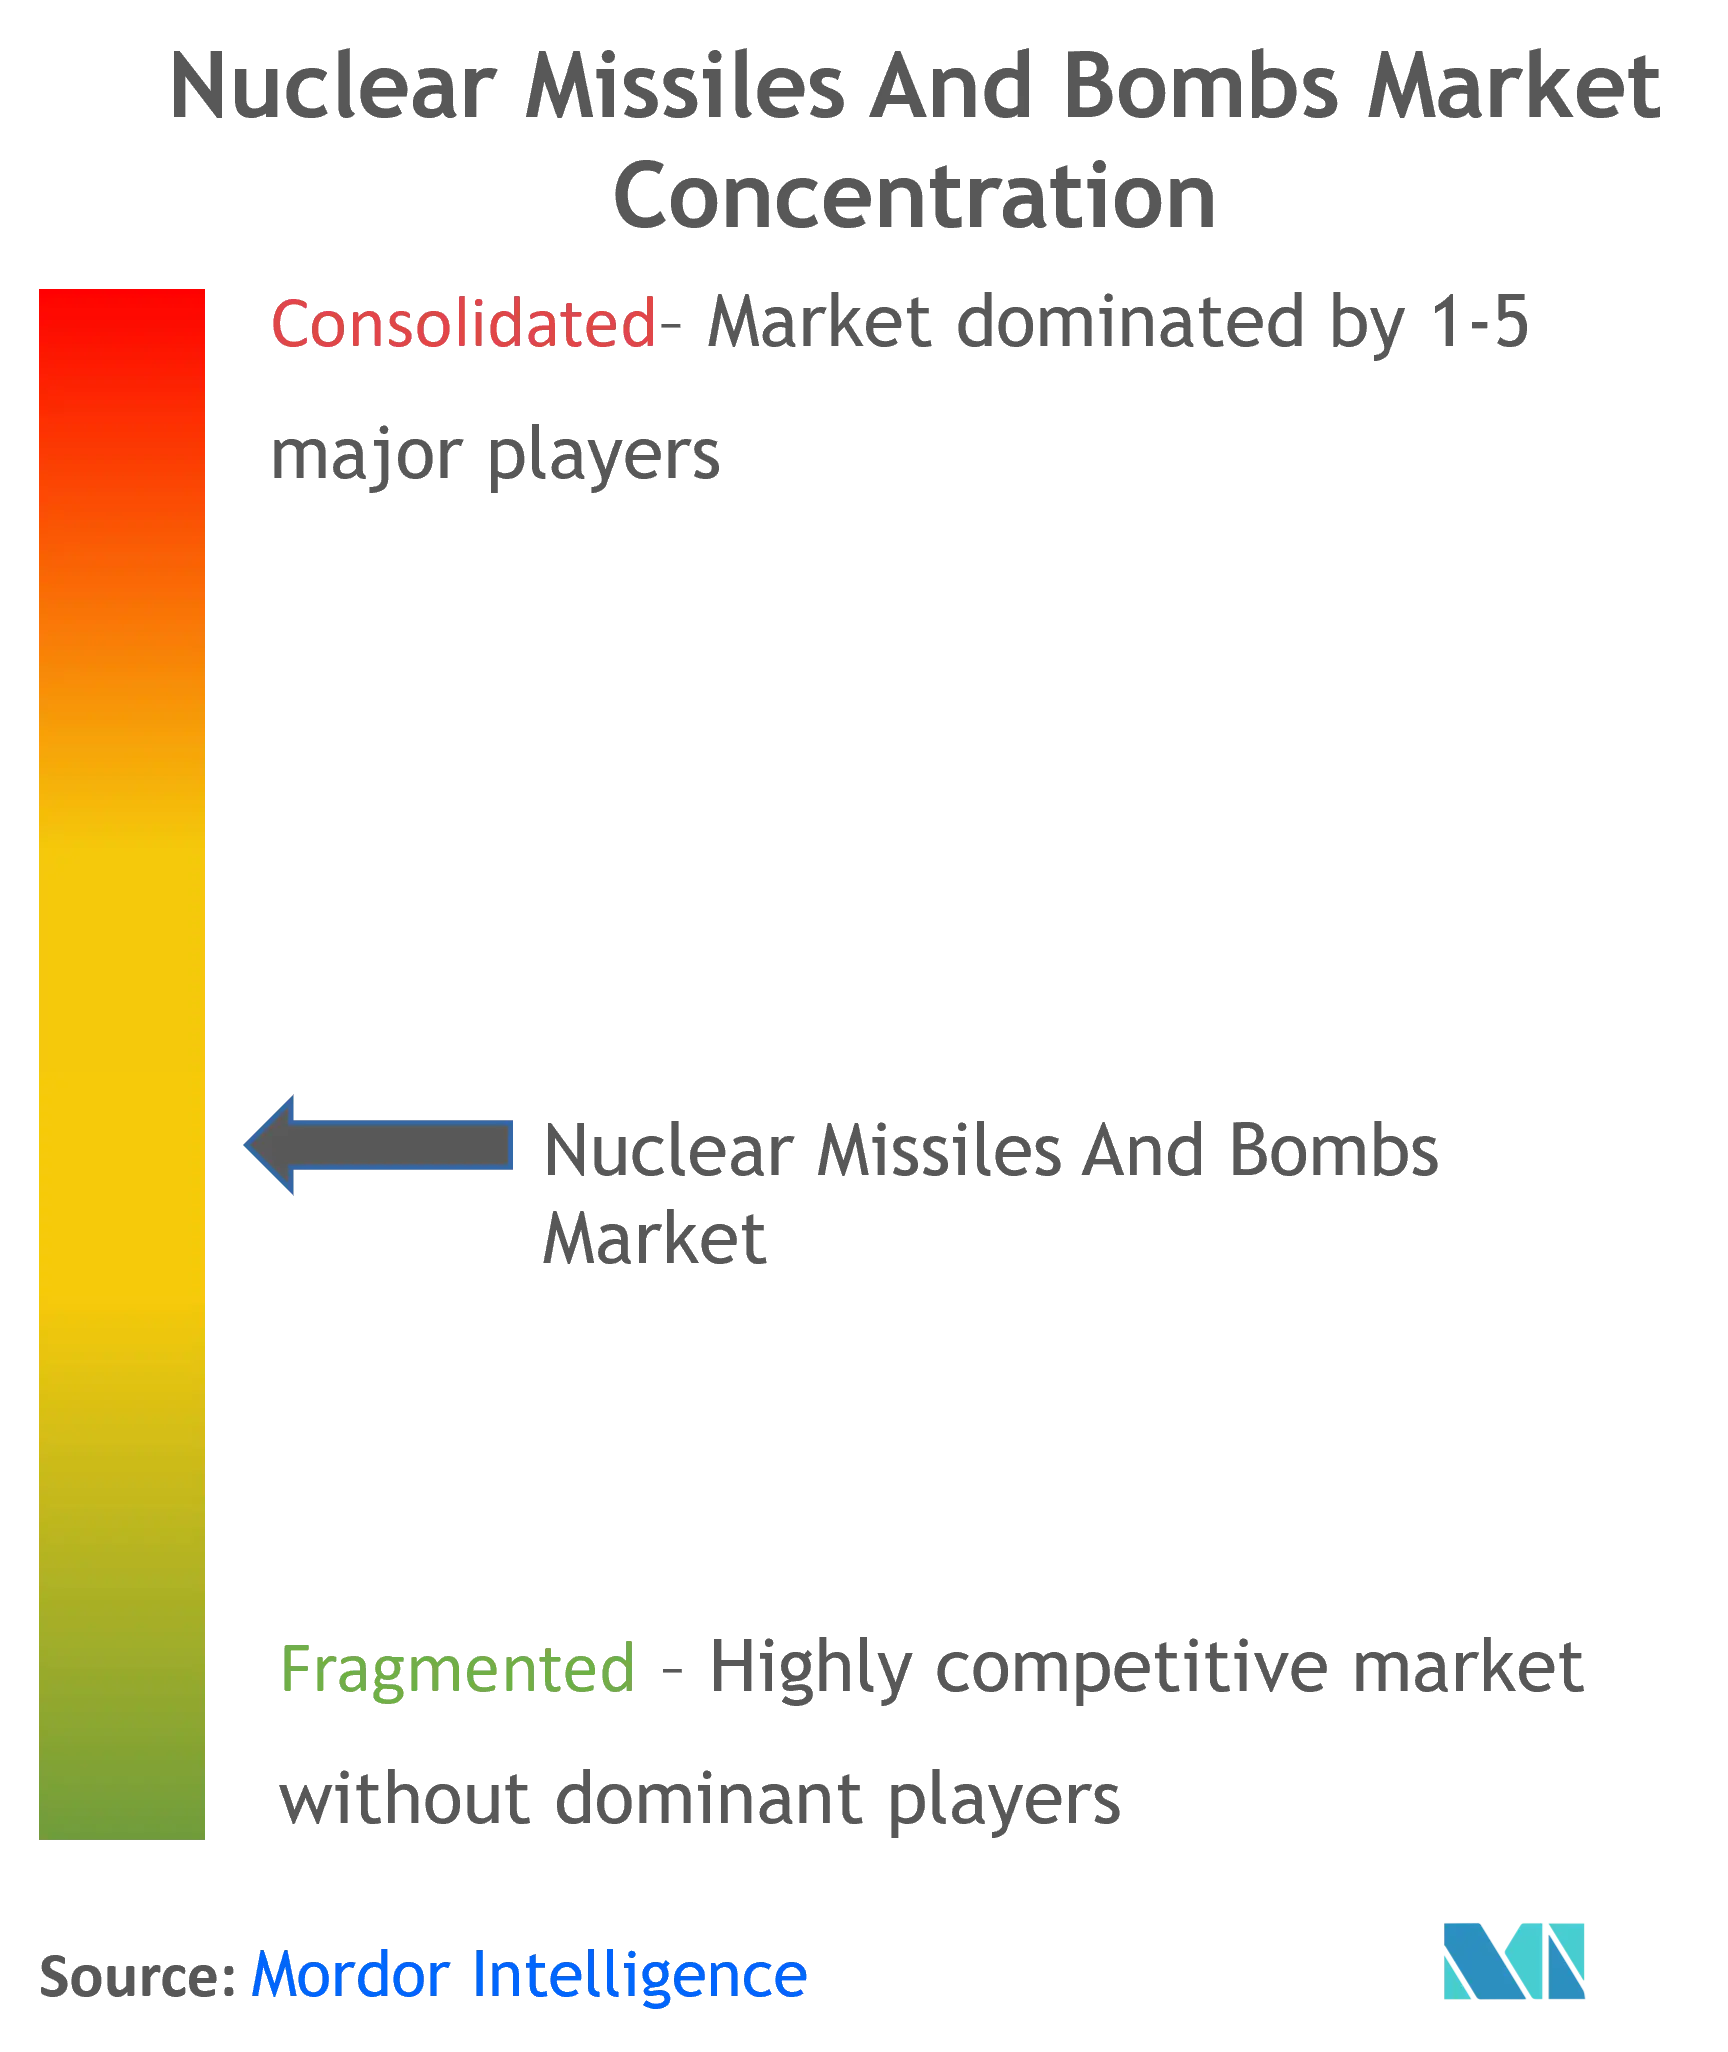 Nuclear Missiles And Bombs Market Concentration